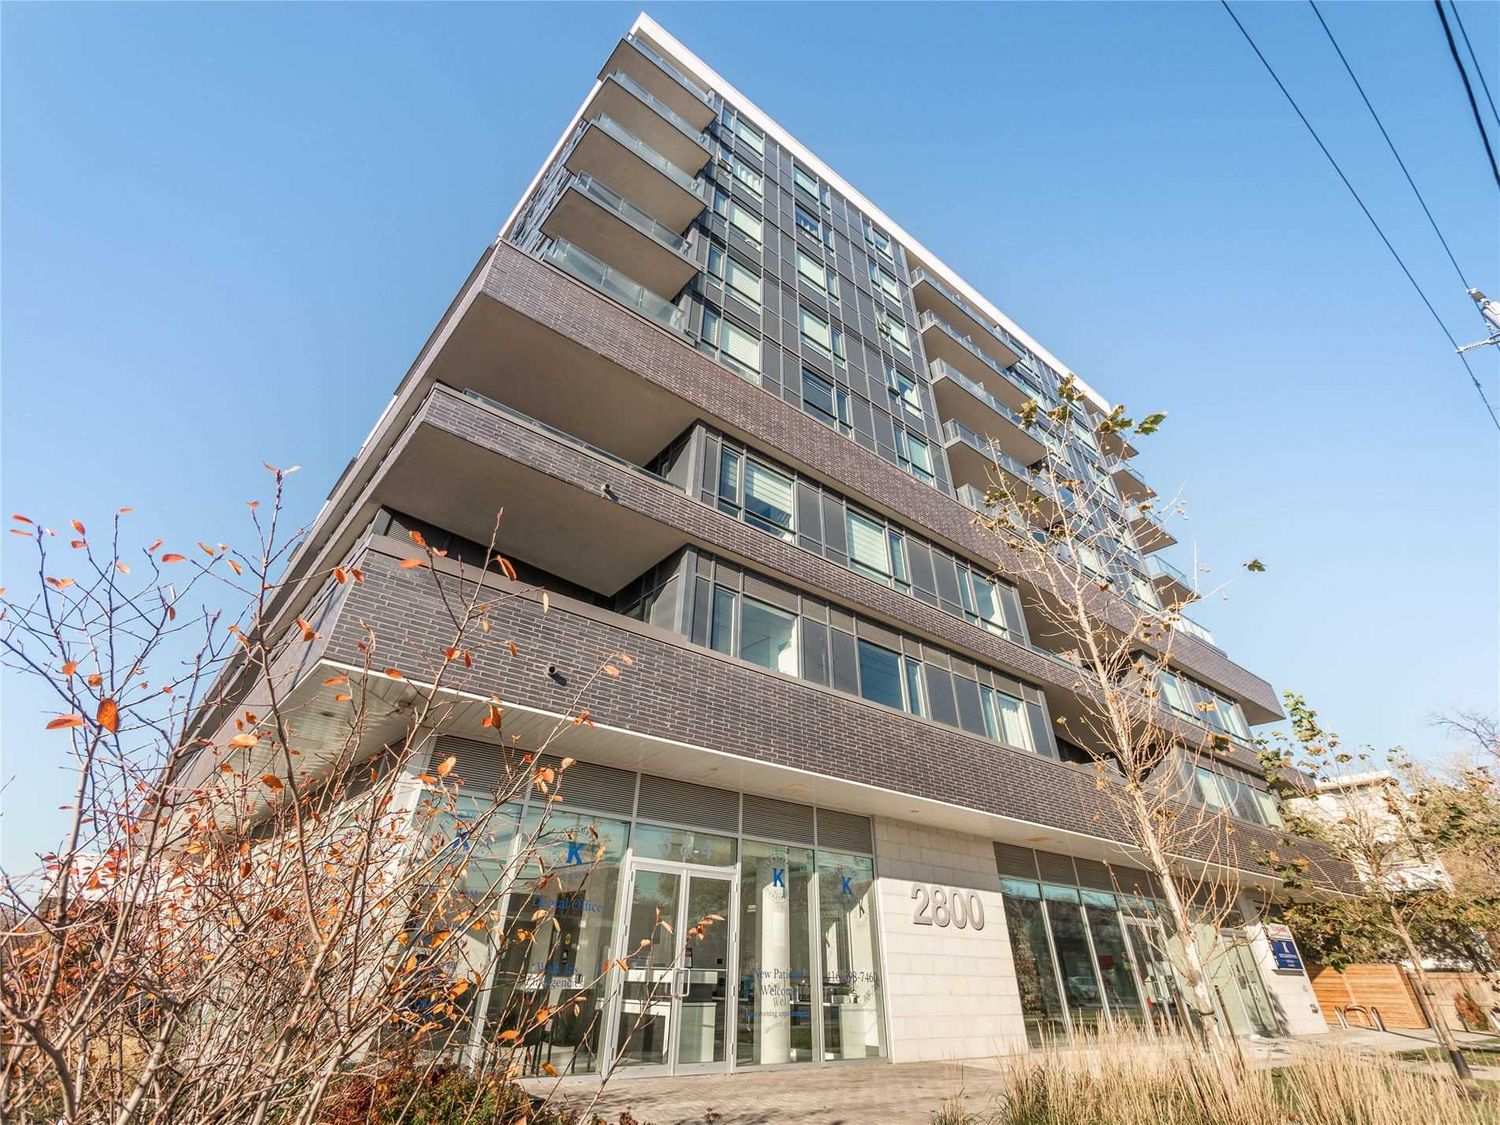 2800 Keele Street. The 2800 Condos is located in  North York, Toronto - image #2 of 2